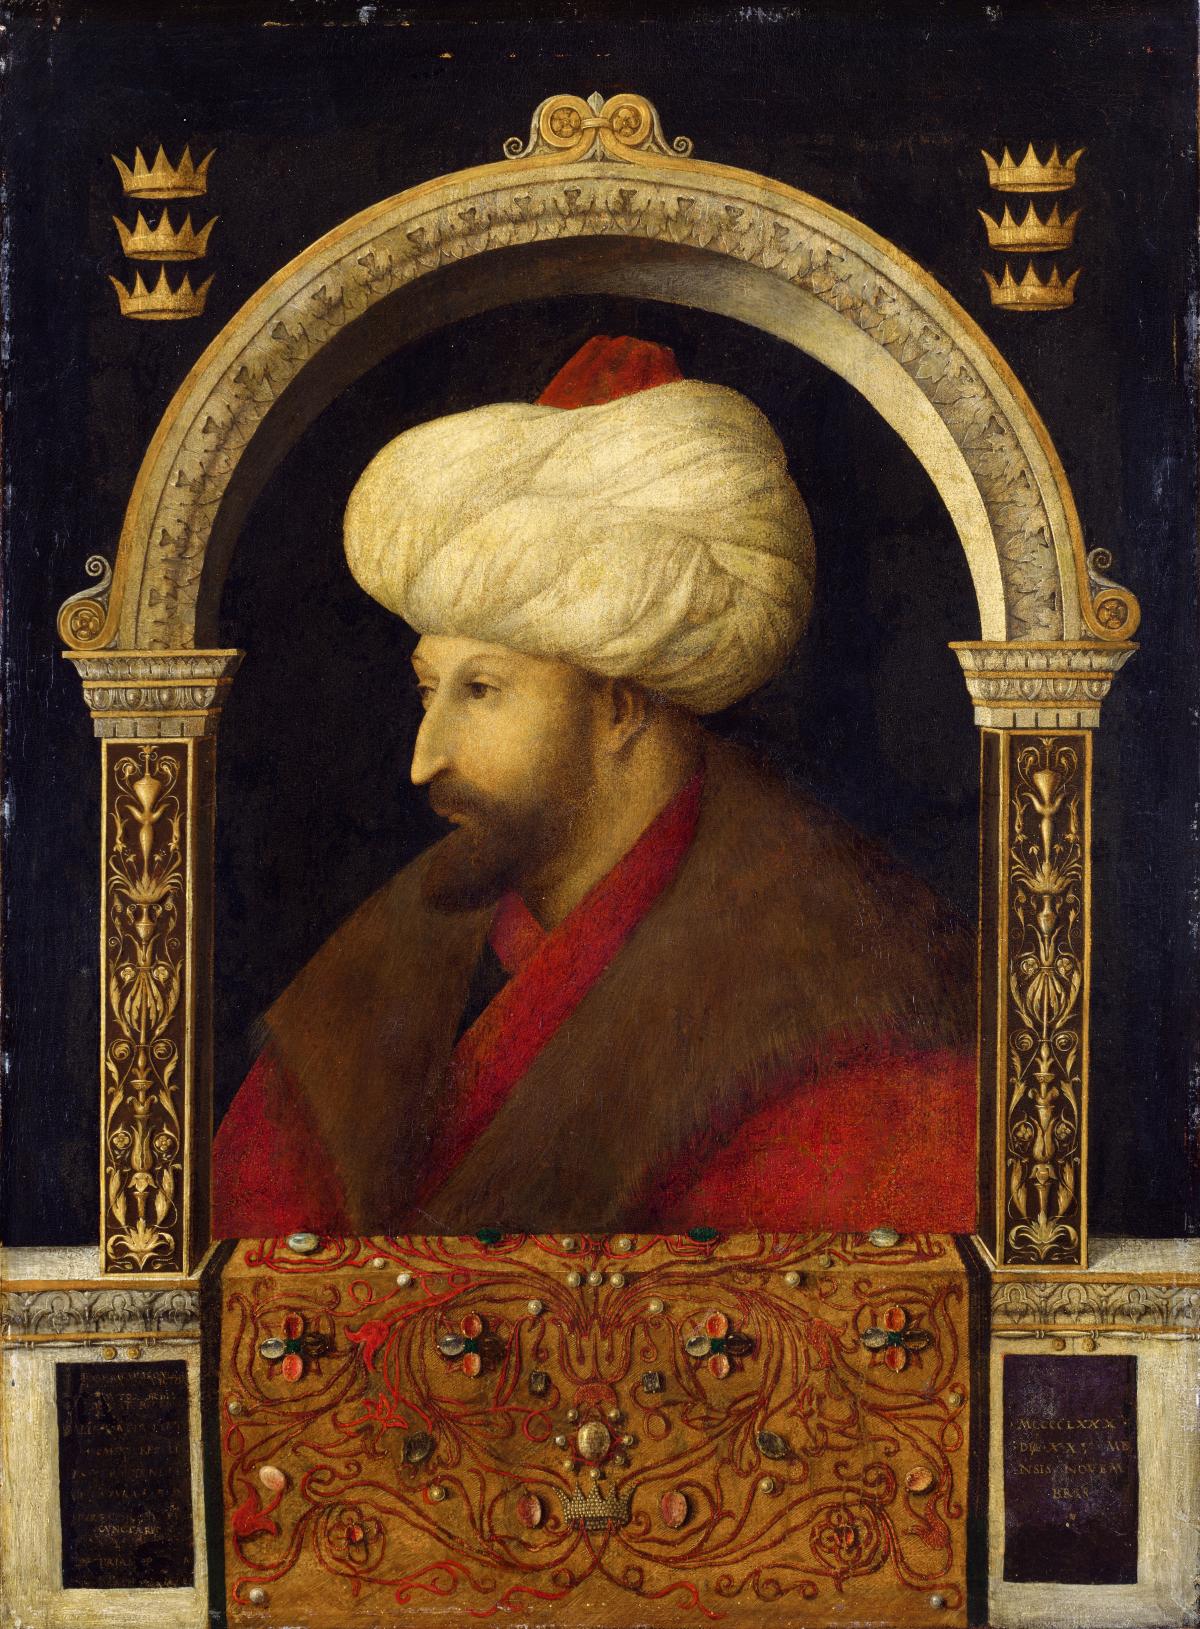 A man wearing a white turban, brown fur collar and red robe, framed by a golden arch